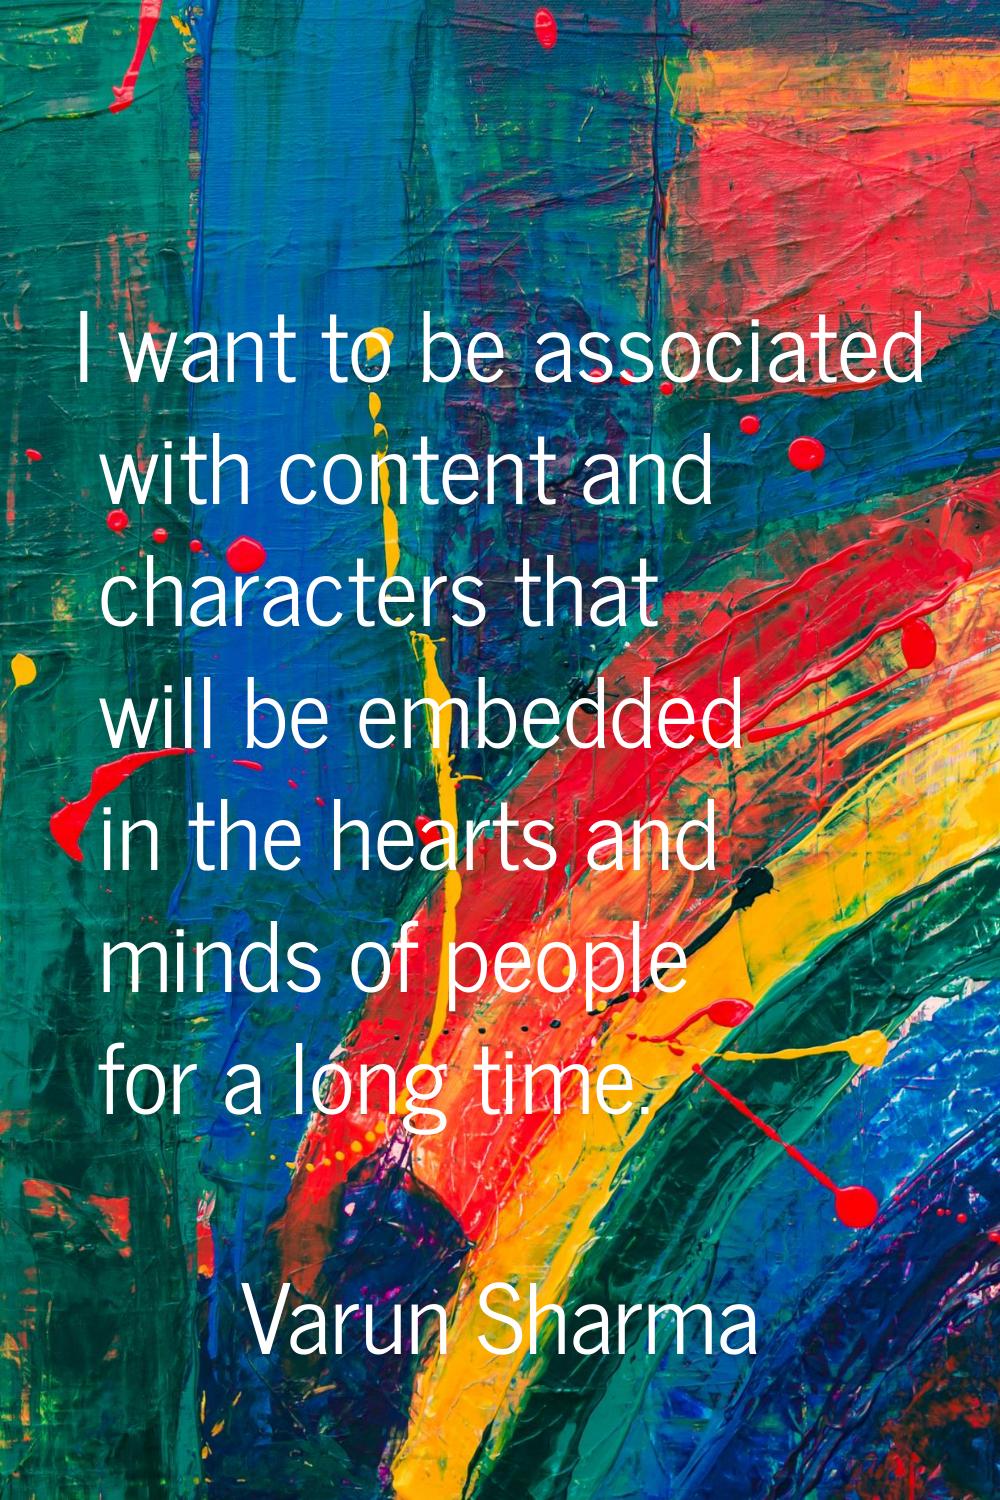 I want to be associated with content and characters that will be embedded in the hearts and minds o